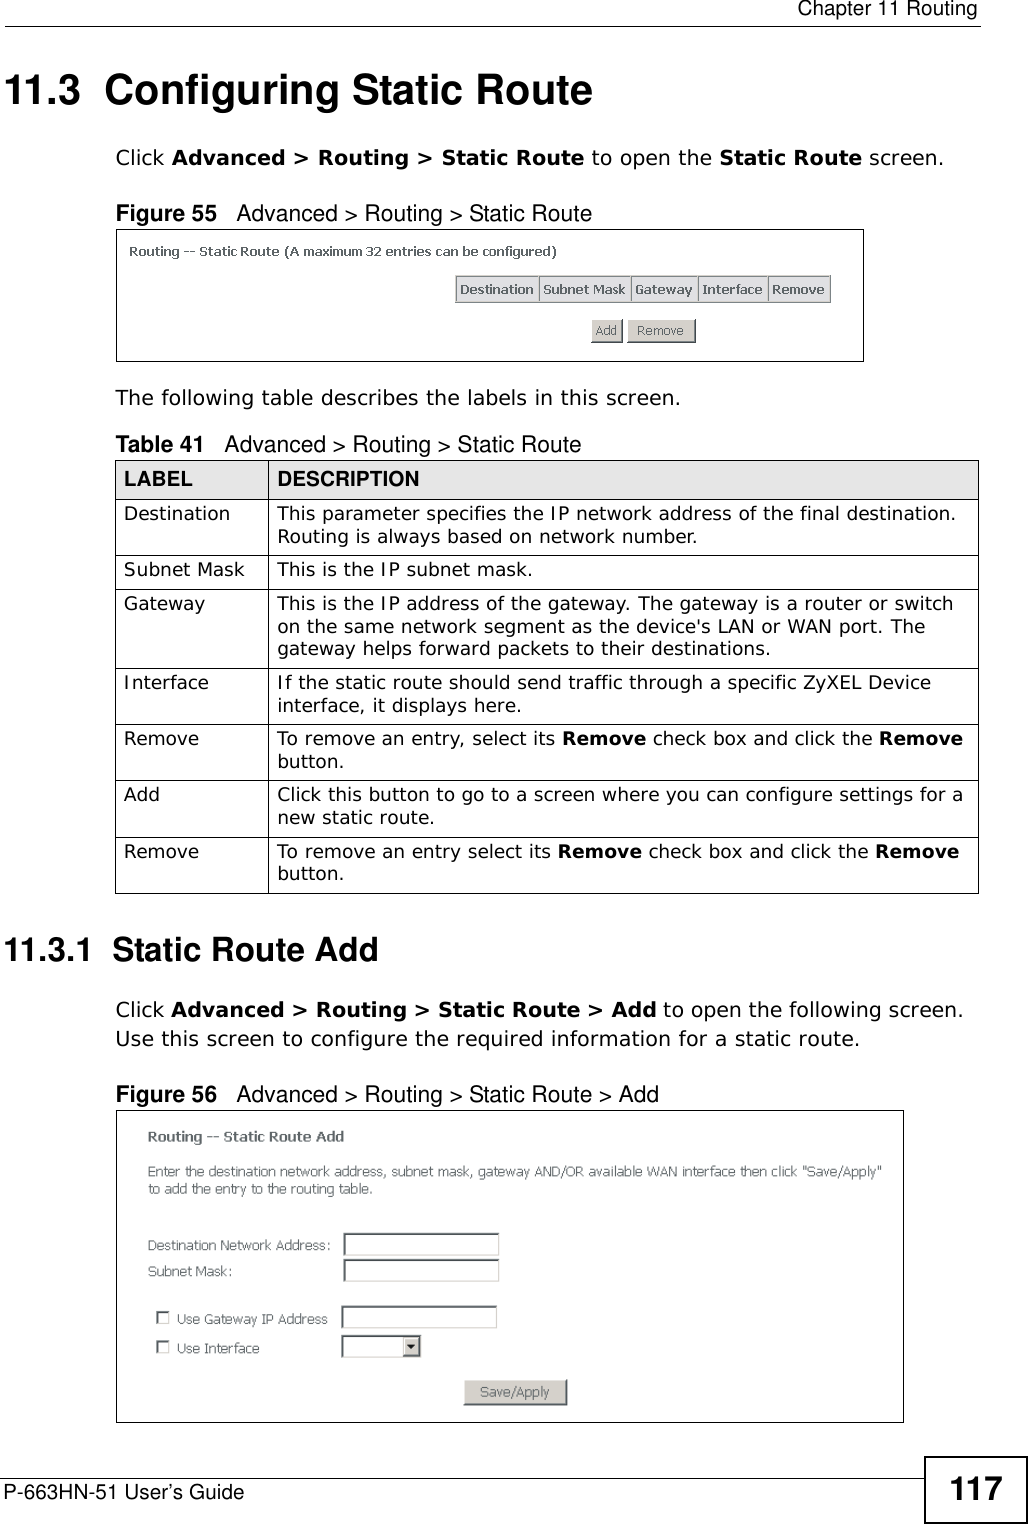  Chapter 11 RoutingP-663HN-51 User’s Guide 11711.3  Configuring Static Route Click Advanced &gt; Routing &gt; Static Route to open the Static Route screen. Figure 55   Advanced &gt; Routing &gt; Static RouteThe following table describes the labels in this screen. 11.3.1  Static Route Add   Click Advanced &gt; Routing &gt; Static Route &gt; Add to open the following screen.  Use this screen to configure the required information for a static route.Figure 56   Advanced &gt; Routing &gt; Static Route &gt; Add Table 41   Advanced &gt; Routing &gt; Static RouteLABEL DESCRIPTIONDestination This parameter specifies the IP network address of the final destination. Routing is always based on network number. Subnet Mask This is the IP subnet mask.Gateway This is the IP address of the gateway. The gateway is a router or switch on the same network segment as the device&apos;s LAN or WAN port. The gateway helps forward packets to their destinations.Interface If the static route should send traffic through a specific ZyXEL Device interface, it displays here.Remove To remove an entry, select its Remove check box and click the Remove button. Add Click this button to go to a screen where you can configure settings for a new static route.Remove To remove an entry select its Remove check box and click the Remove button. 